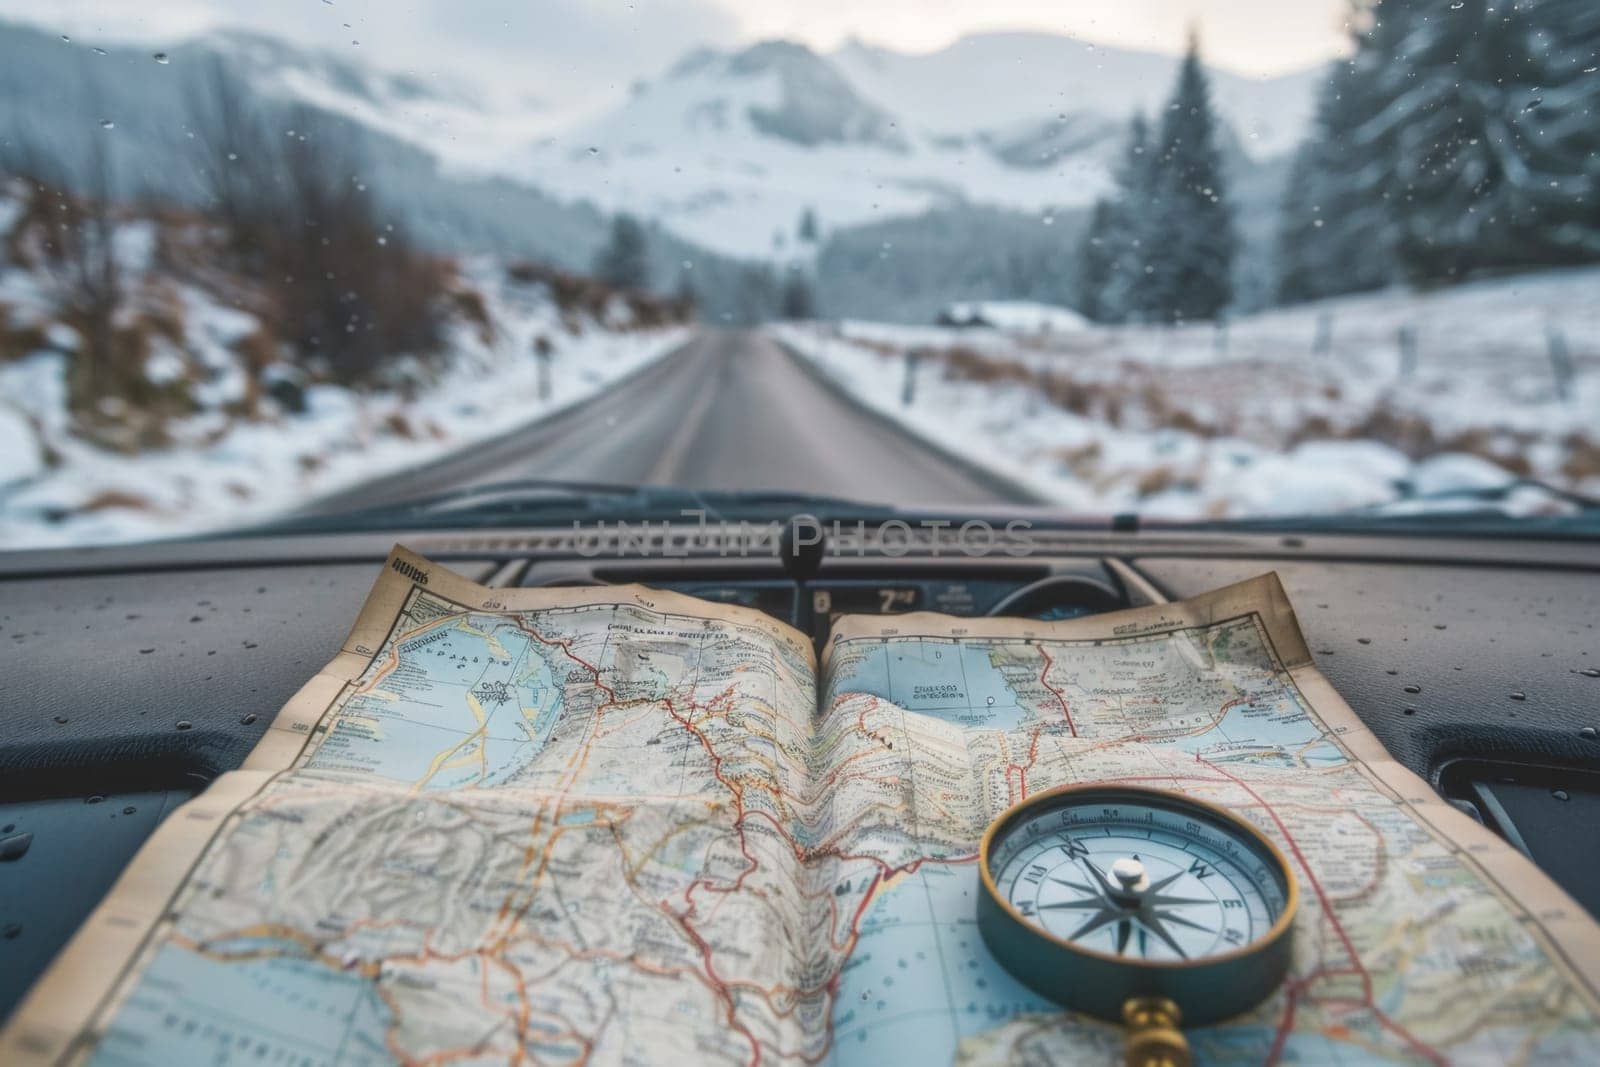 View from inside a vehicle displaying a map and a compass on the dashboard, with a snowy road and mountains ahead, evoking a sense of travel and adventure